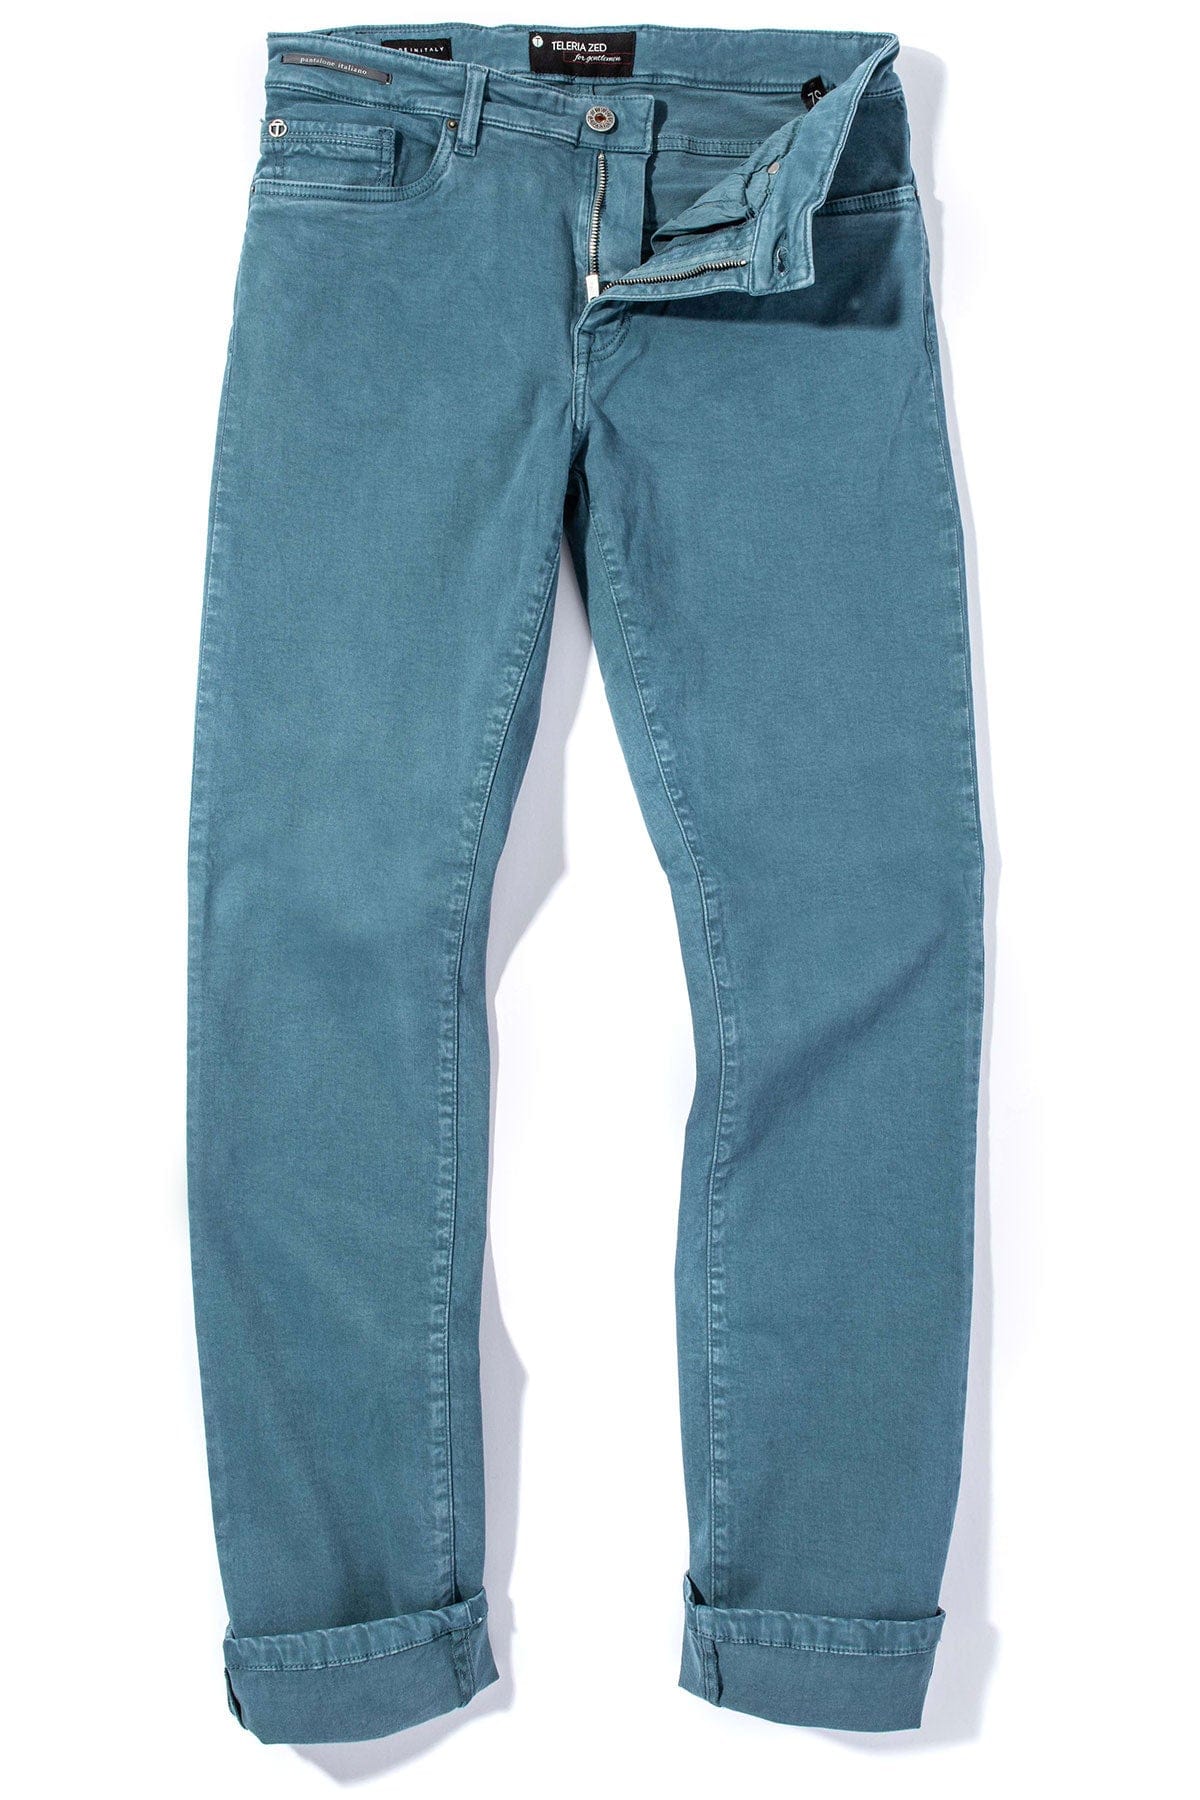 Ryland Rugged Soft Touch Cotton Jeans in Niagra - AXEL'S